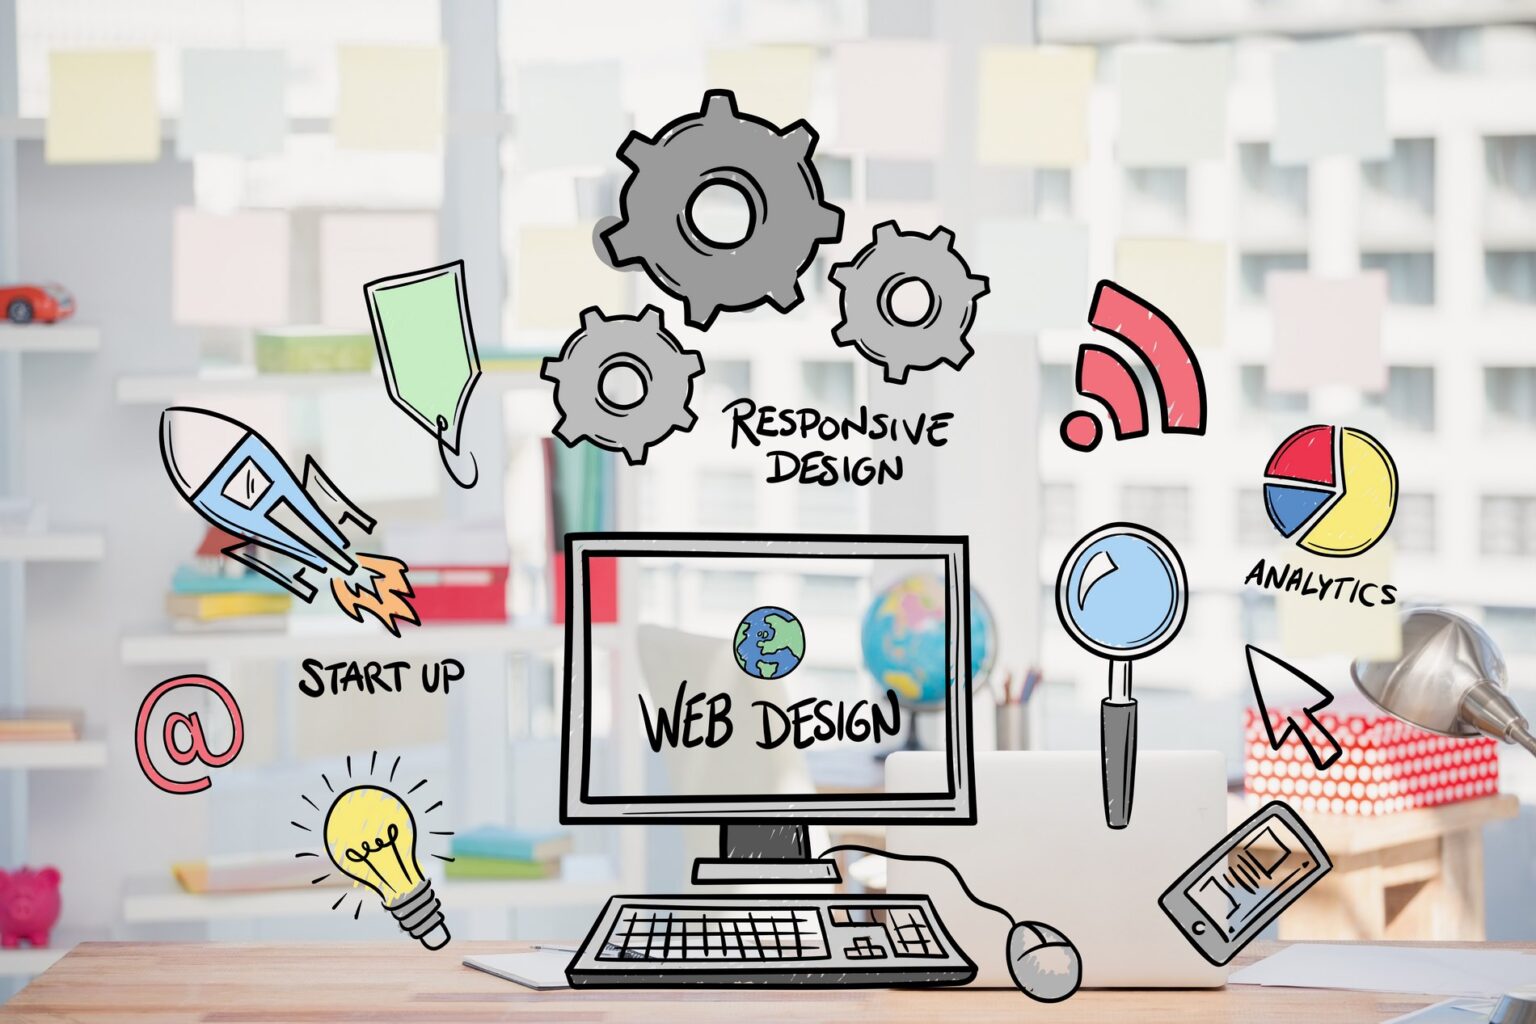 Why Use a Website Development and Design Services?